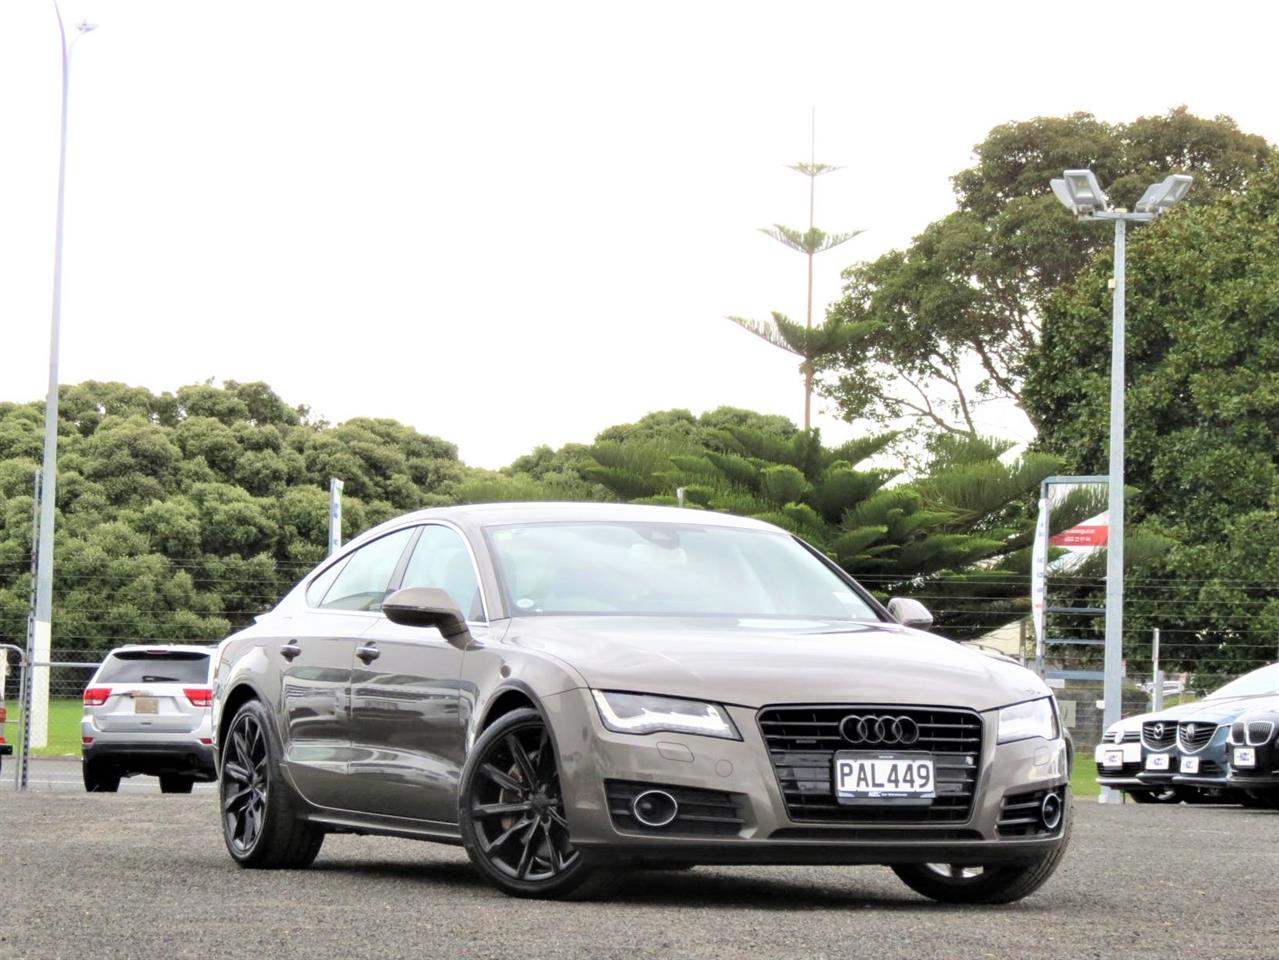 NZC 2011 Audi A7 just arrived to Auckland